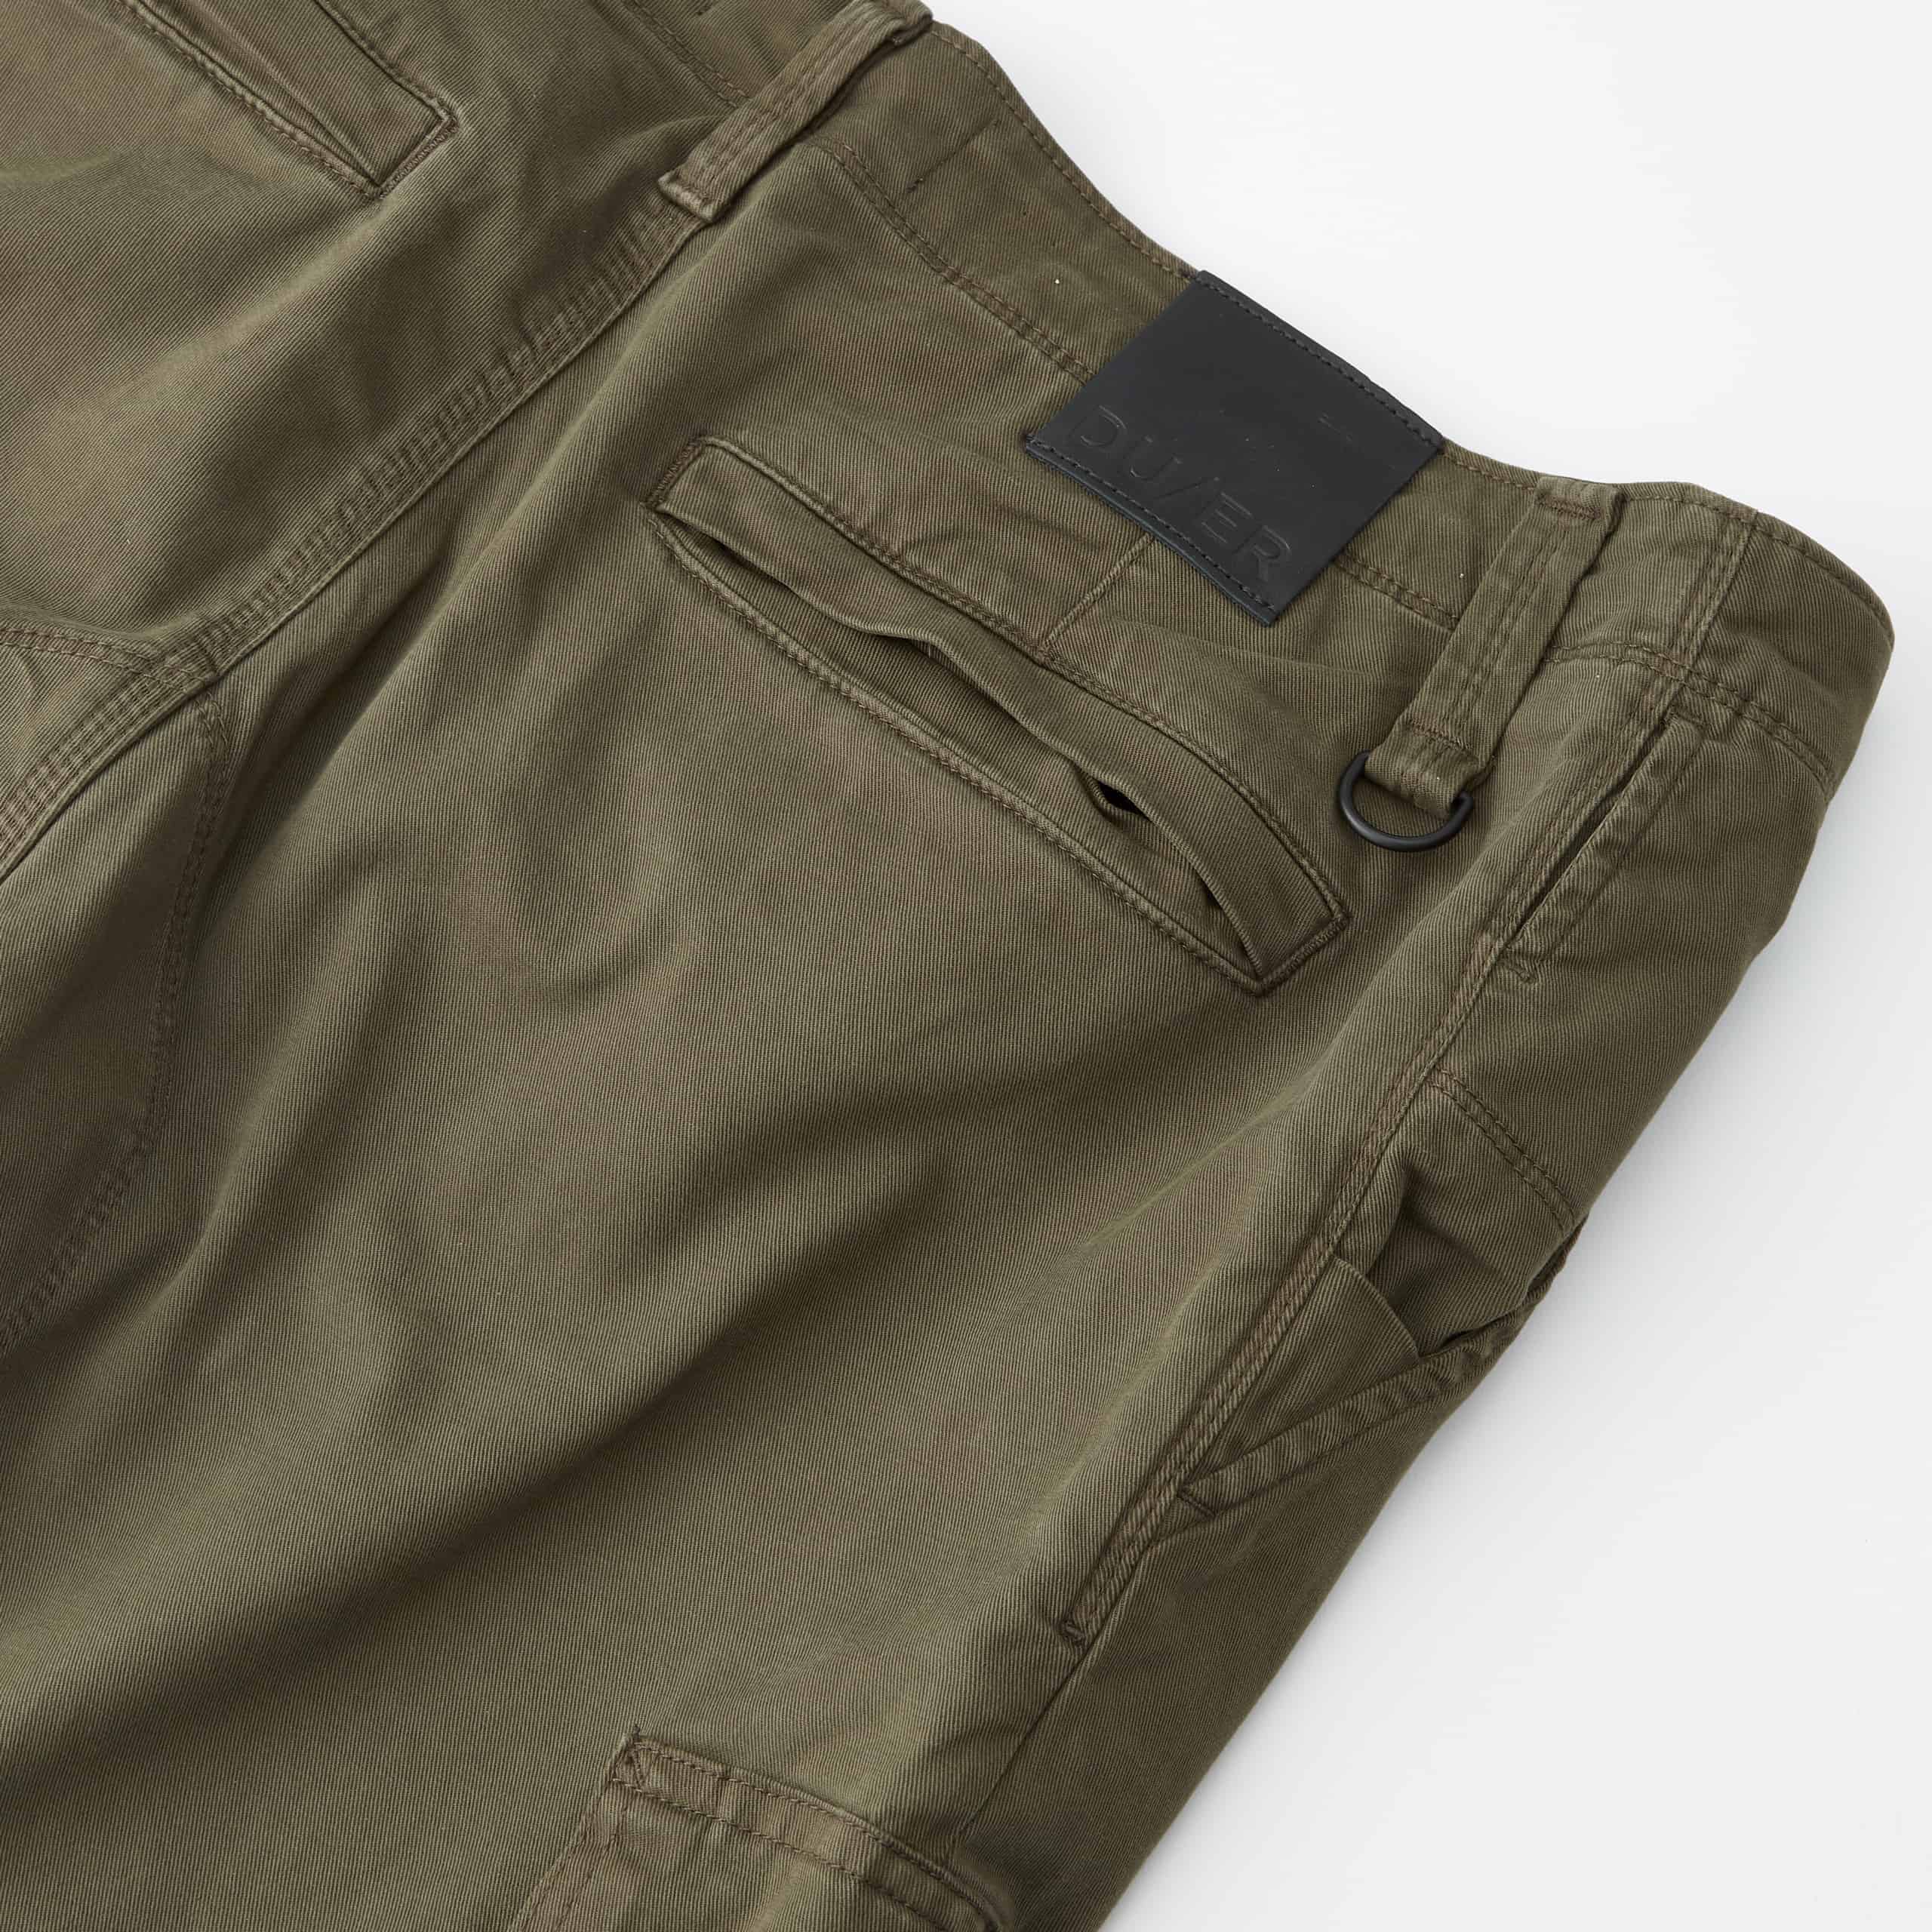 Live Free with the Duer Adventure Pant in Platoon - Worn & Wound